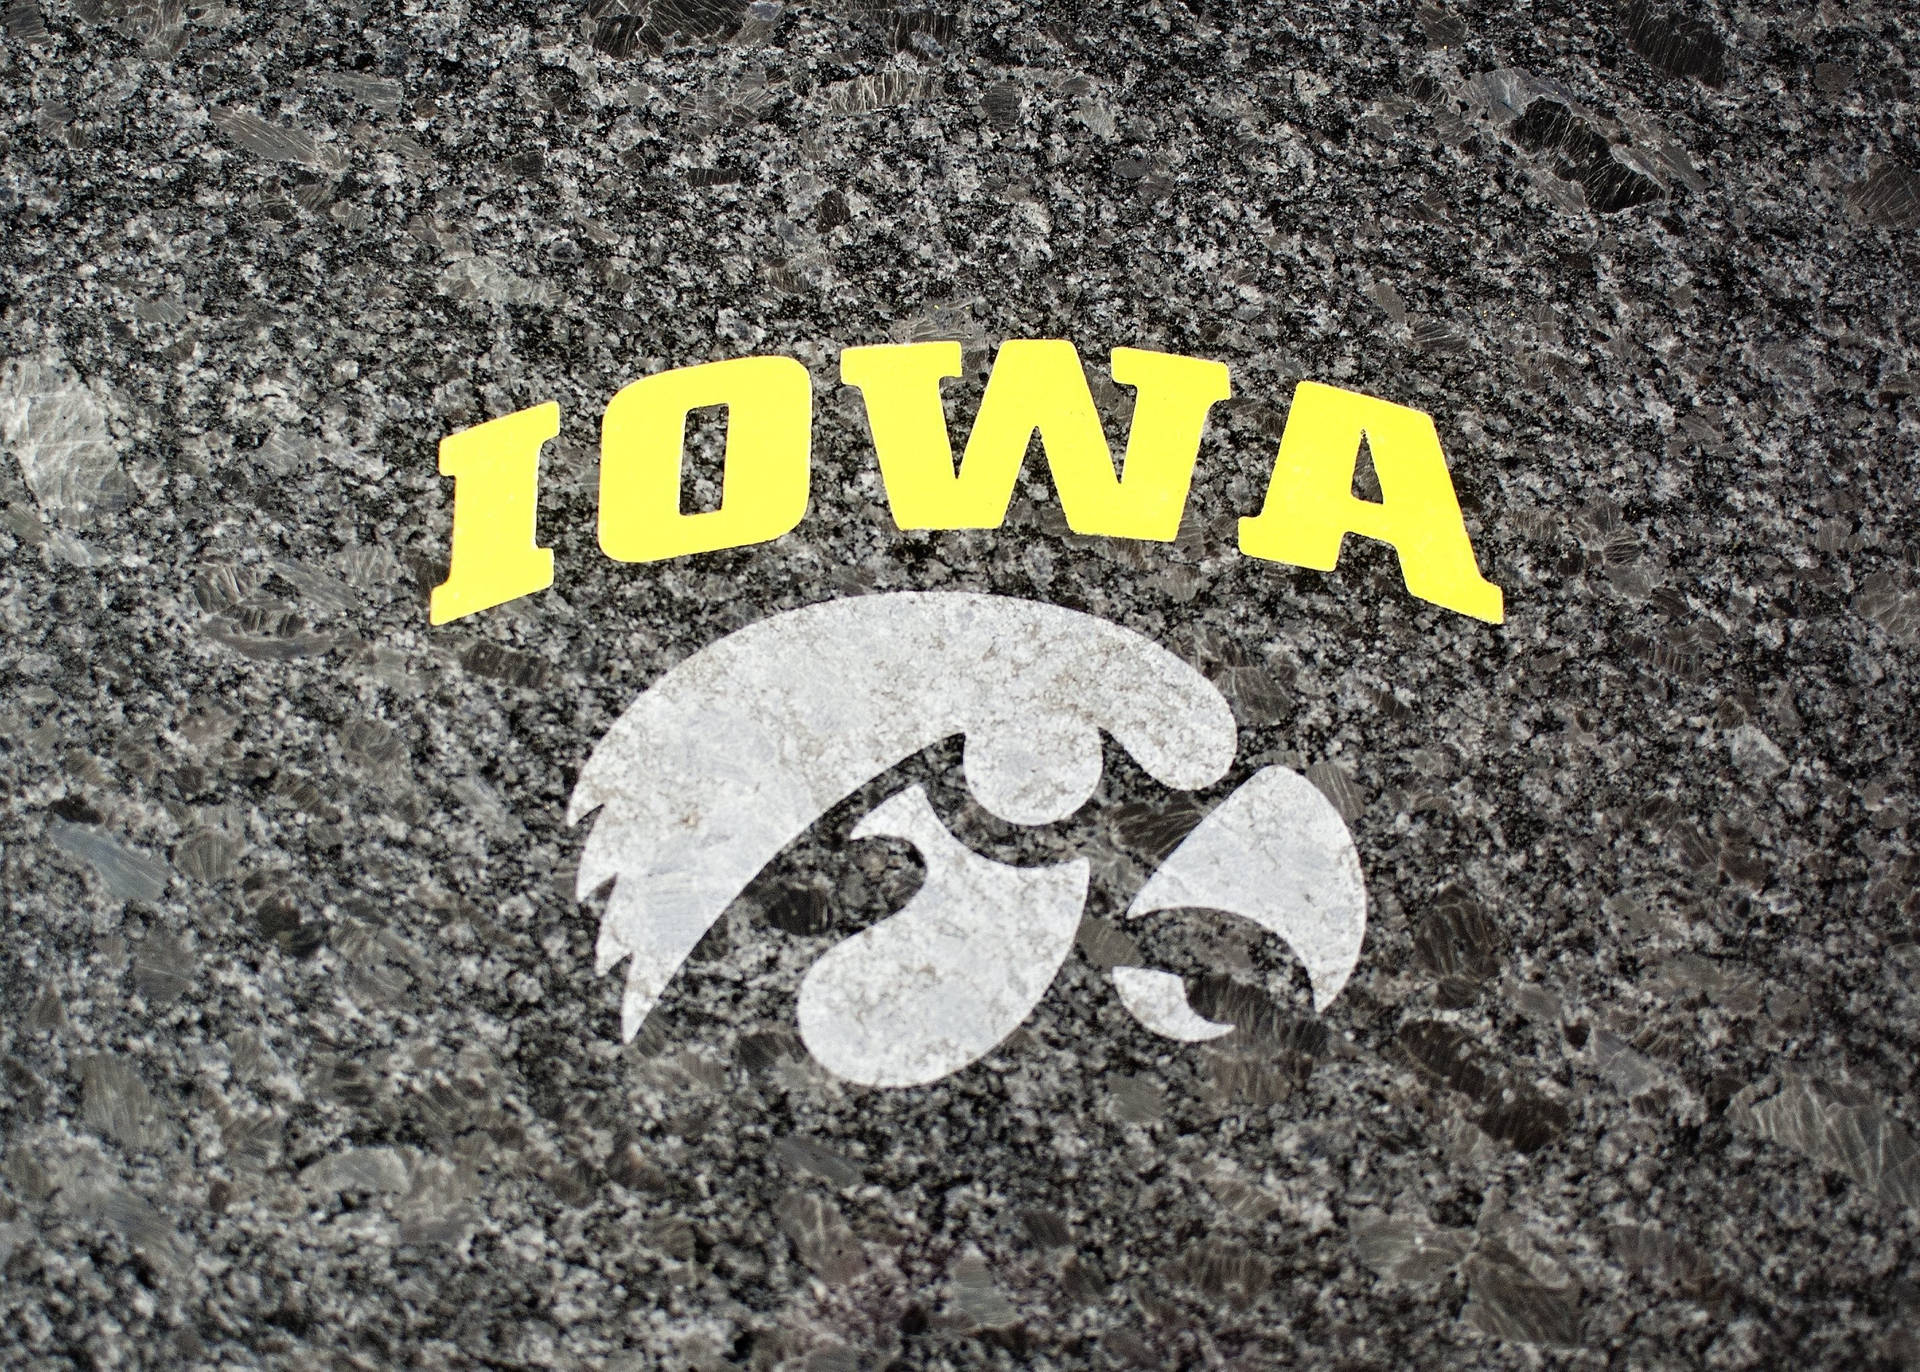 The irresistible strength of the Iowa Hawkeyes captured in a striking image. Wallpaper